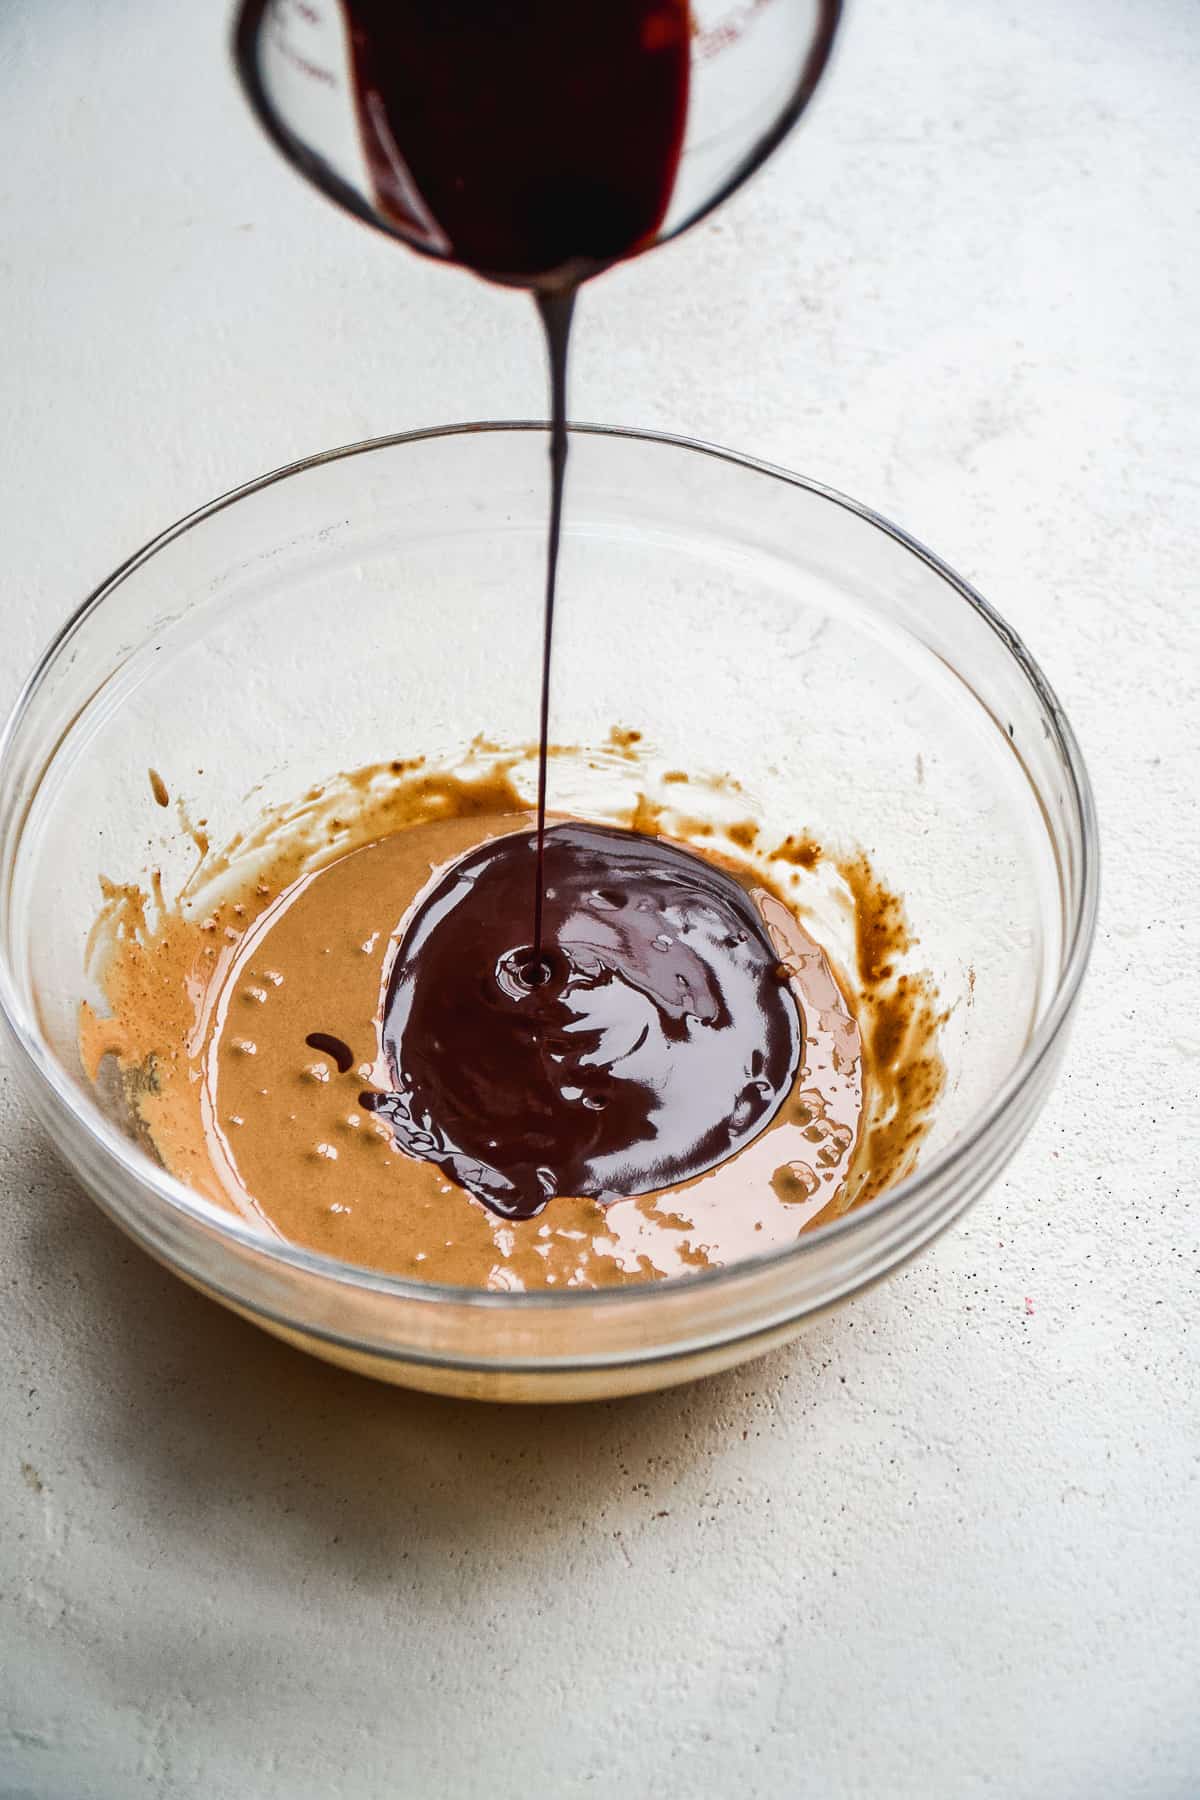 Melted chocolate being poured into a mixing bowl.